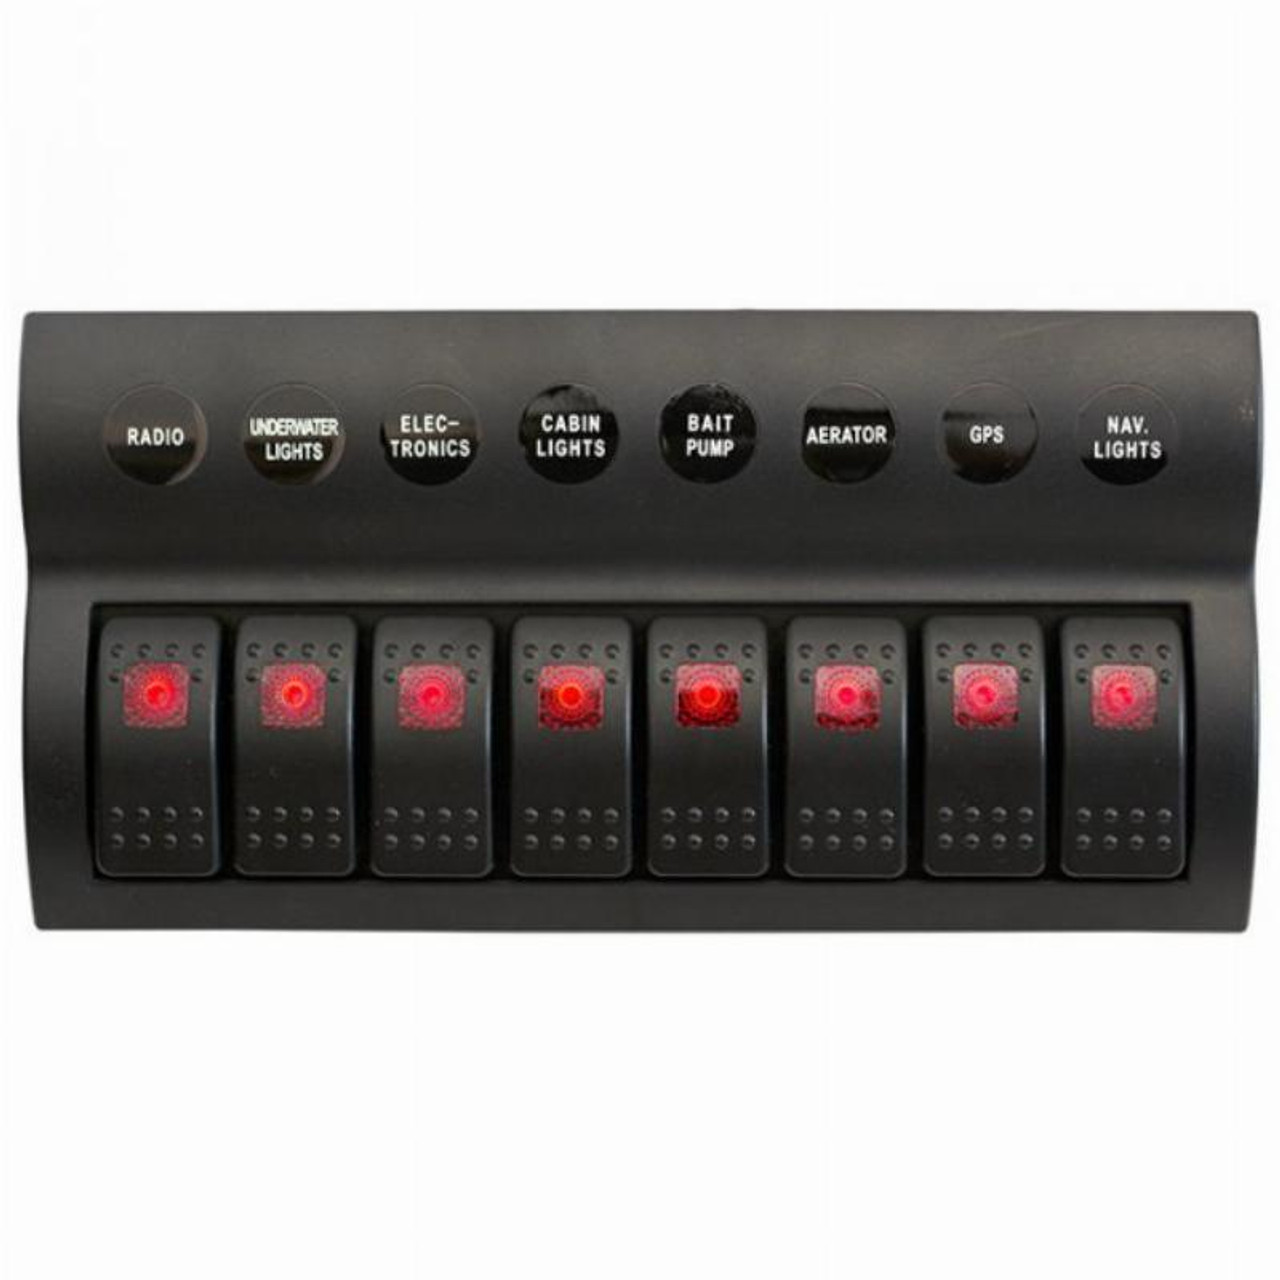 Panel Switch,12-24V Car Universal 6P LED Touch Membrane Control Panel Switch Electronic Accessory On Off Rocker Toggle Switch Panel Box - 1